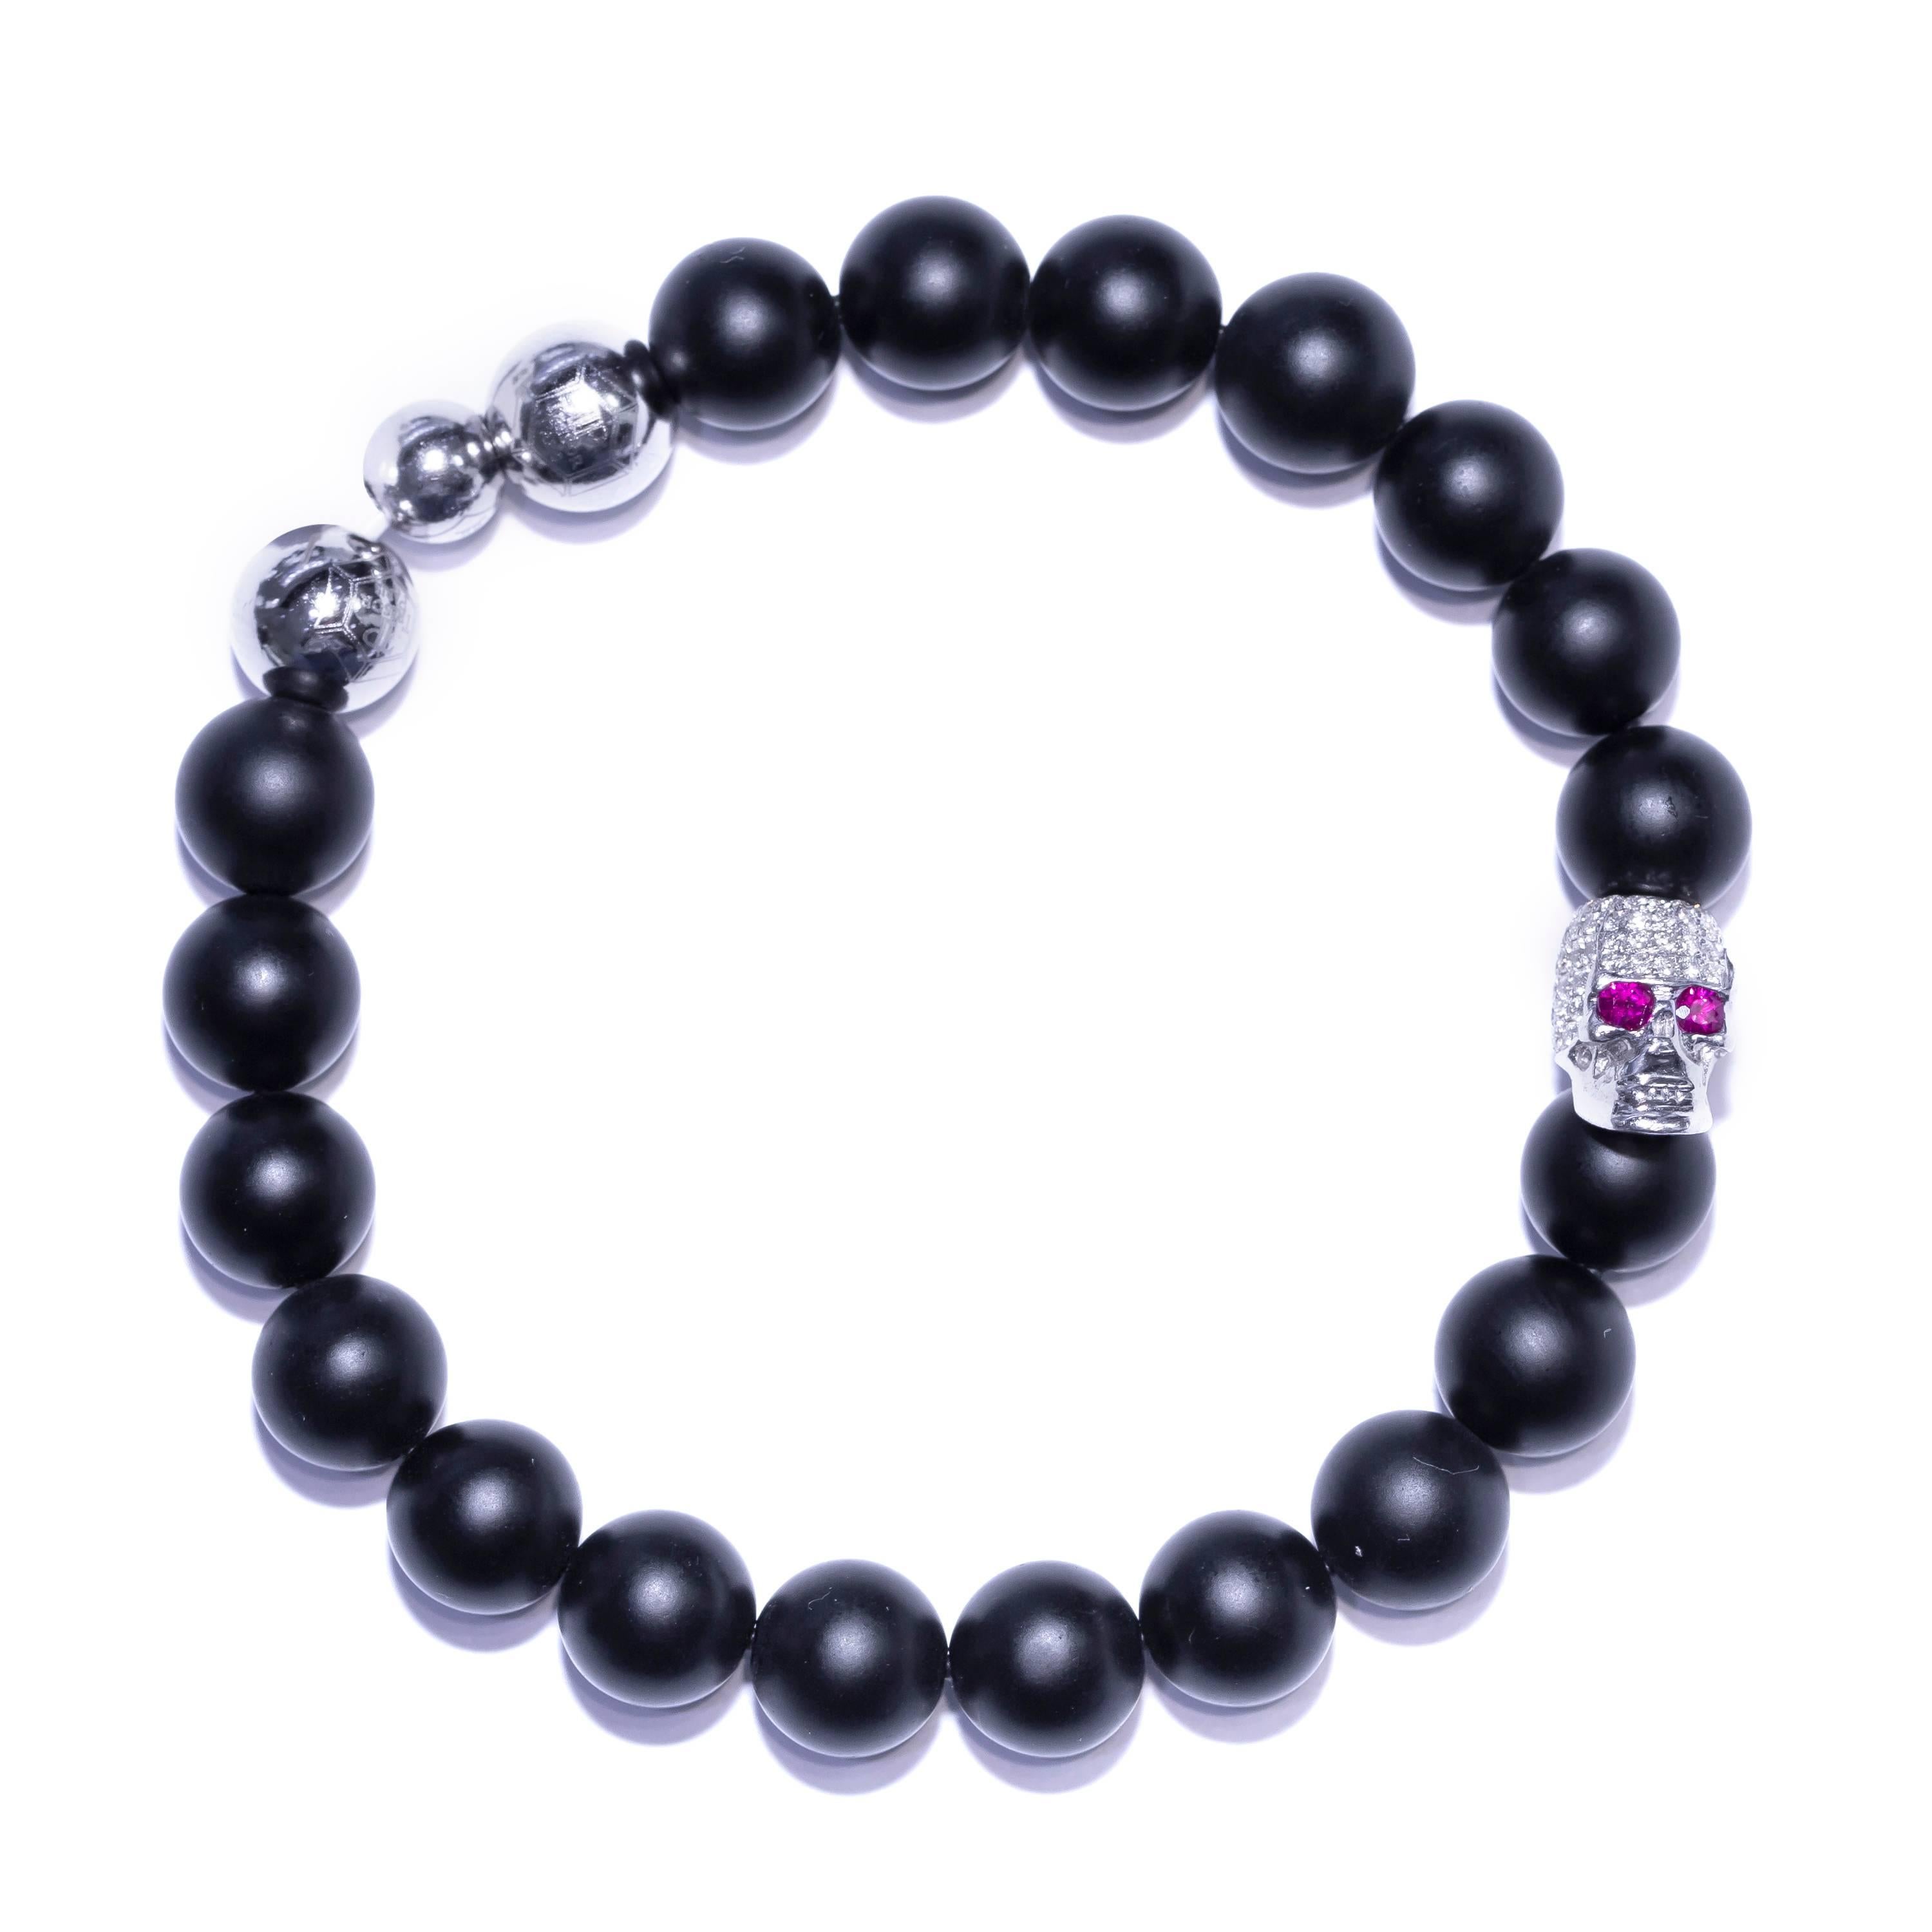 The Original Tresor Paris Bracelet from the Vega collection having one Pave set Diamond skull 0.50 Carat round diamond set in 18 Karat White Gold and Ruby eyes, 3 stainless steel beads and 19 matte black satin agate beads 8mm. Size will fit from